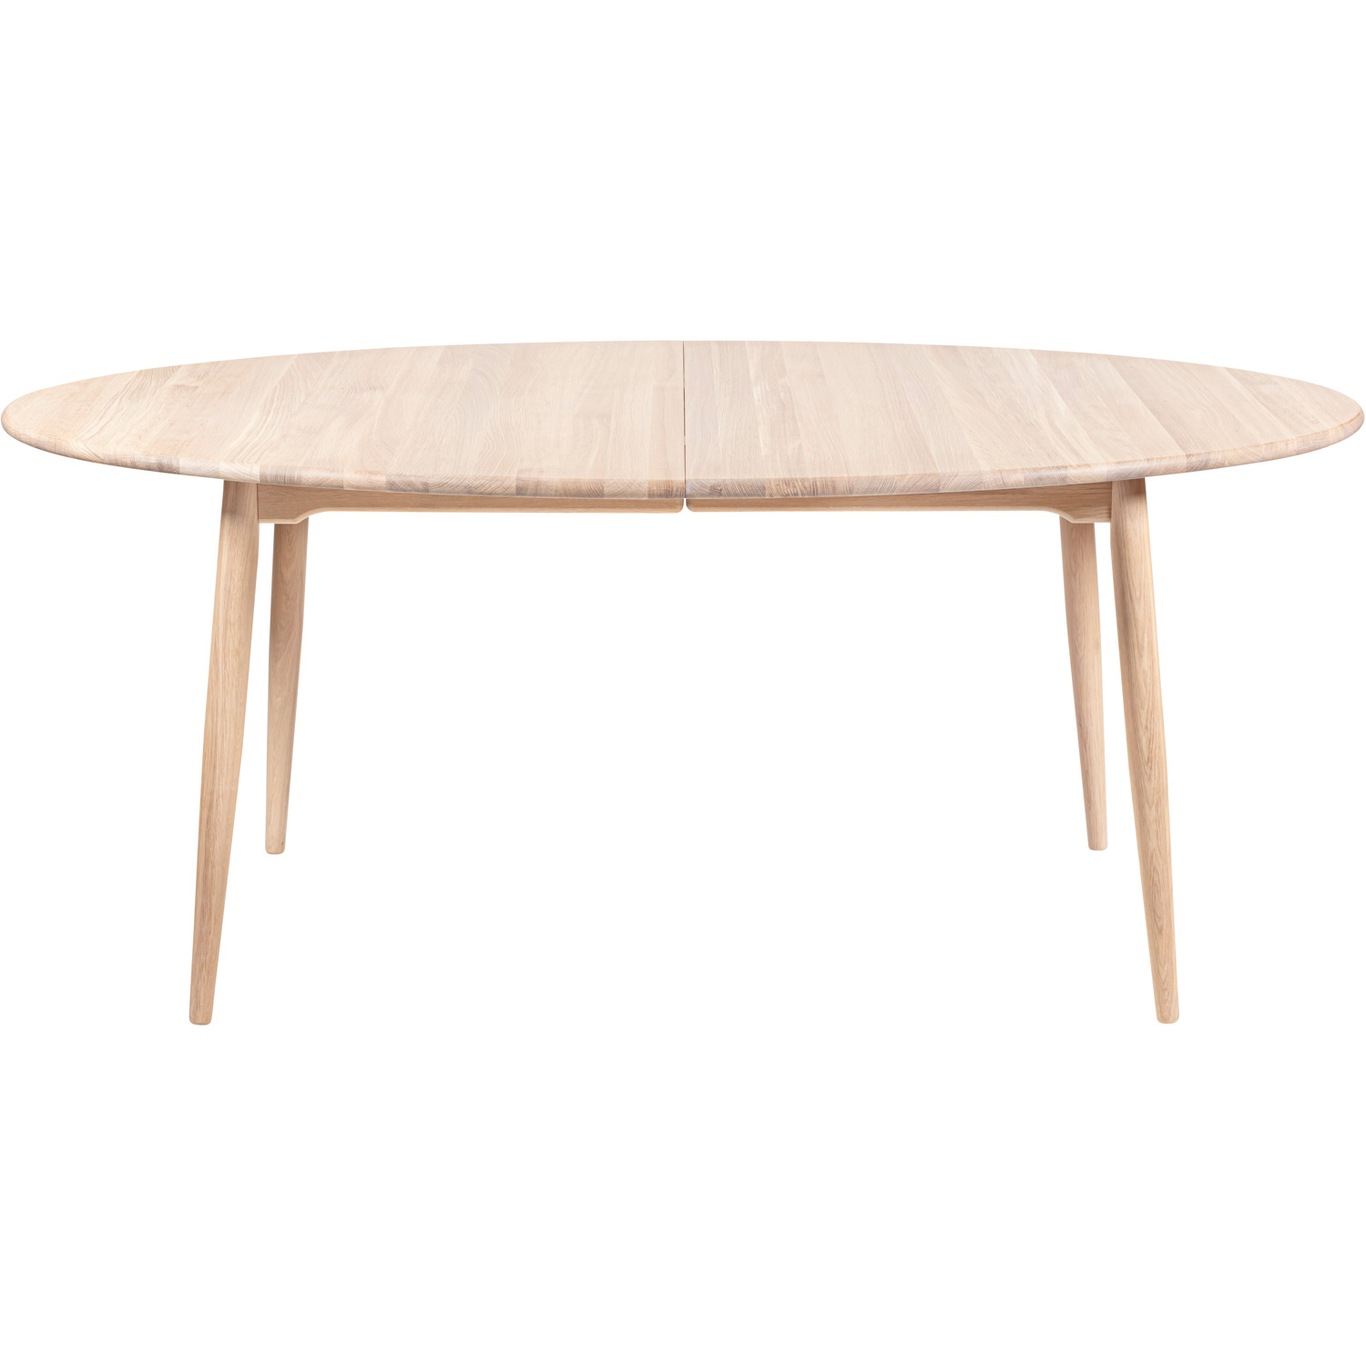 Symphony 76 Dining Table,  105x180 White oiled Oak